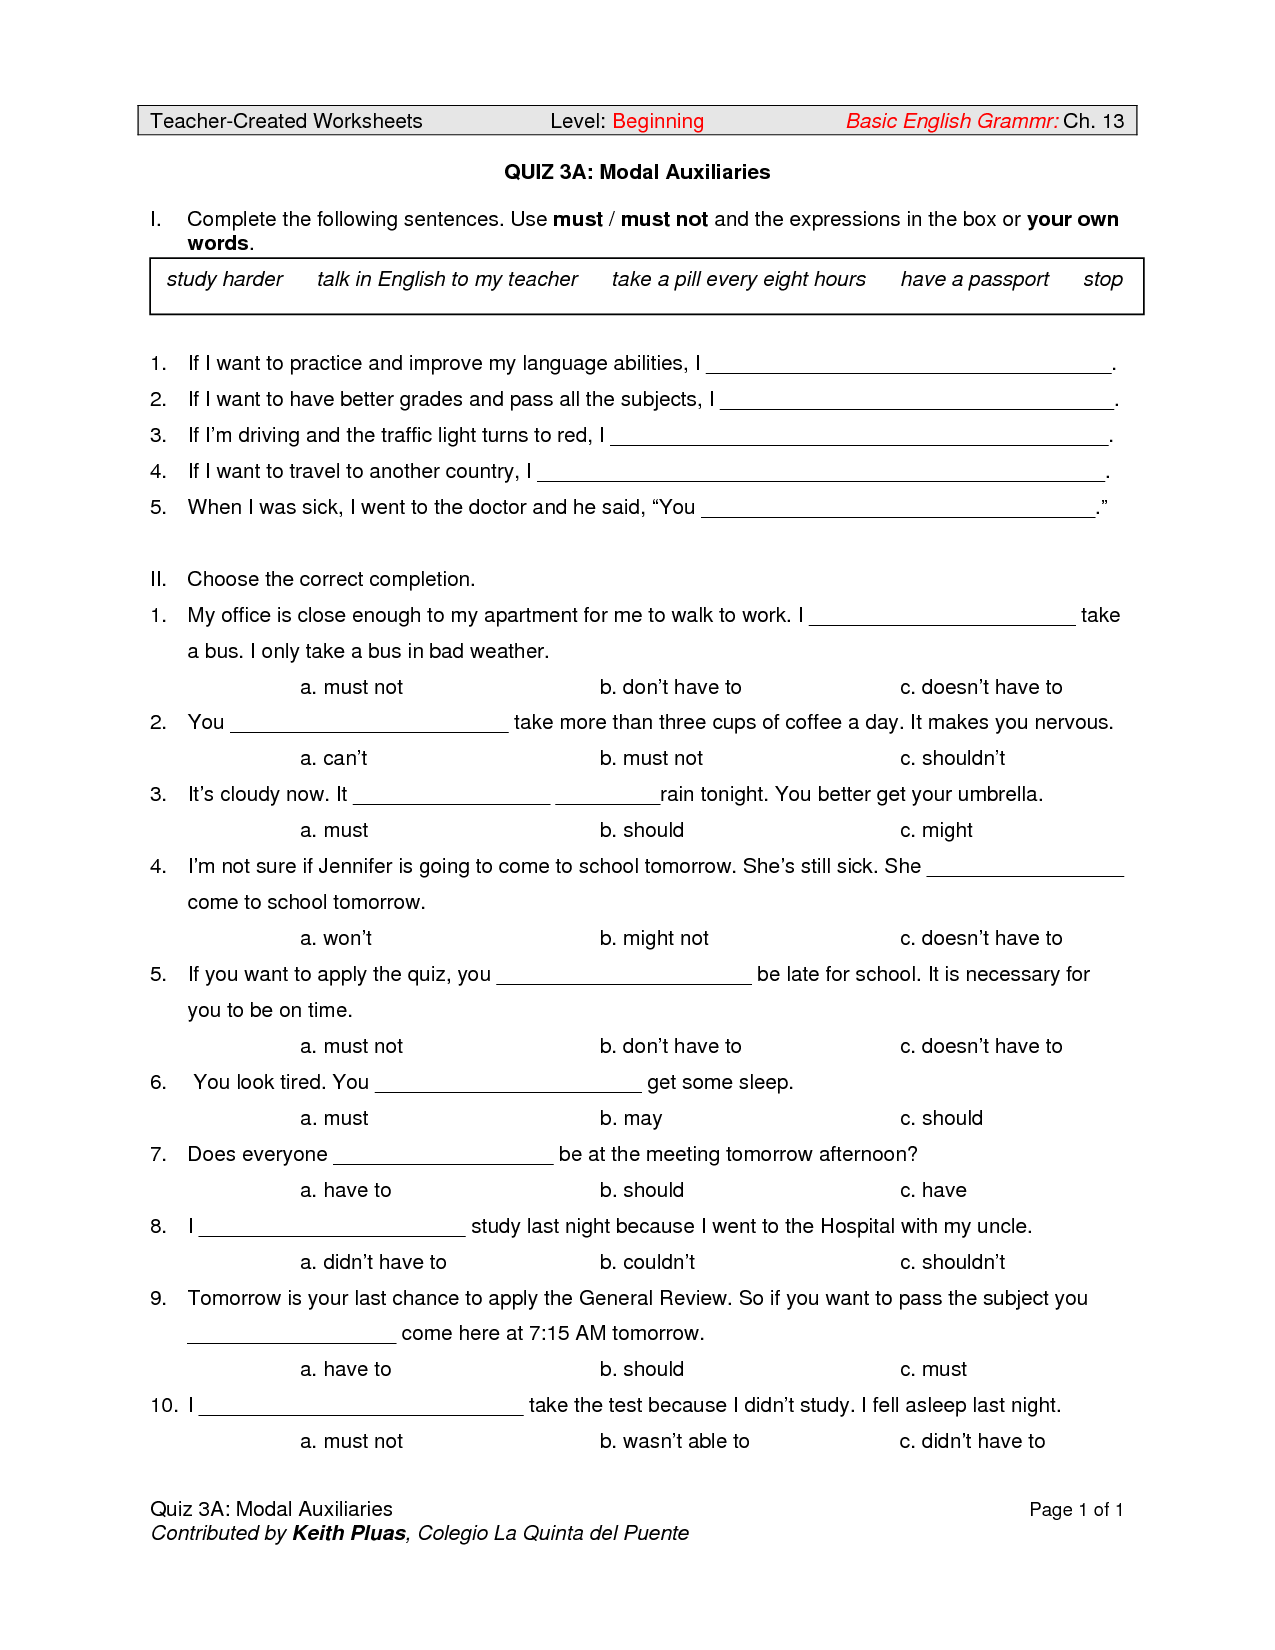 Modal Auxiliary Verbs Worksheet With Answers